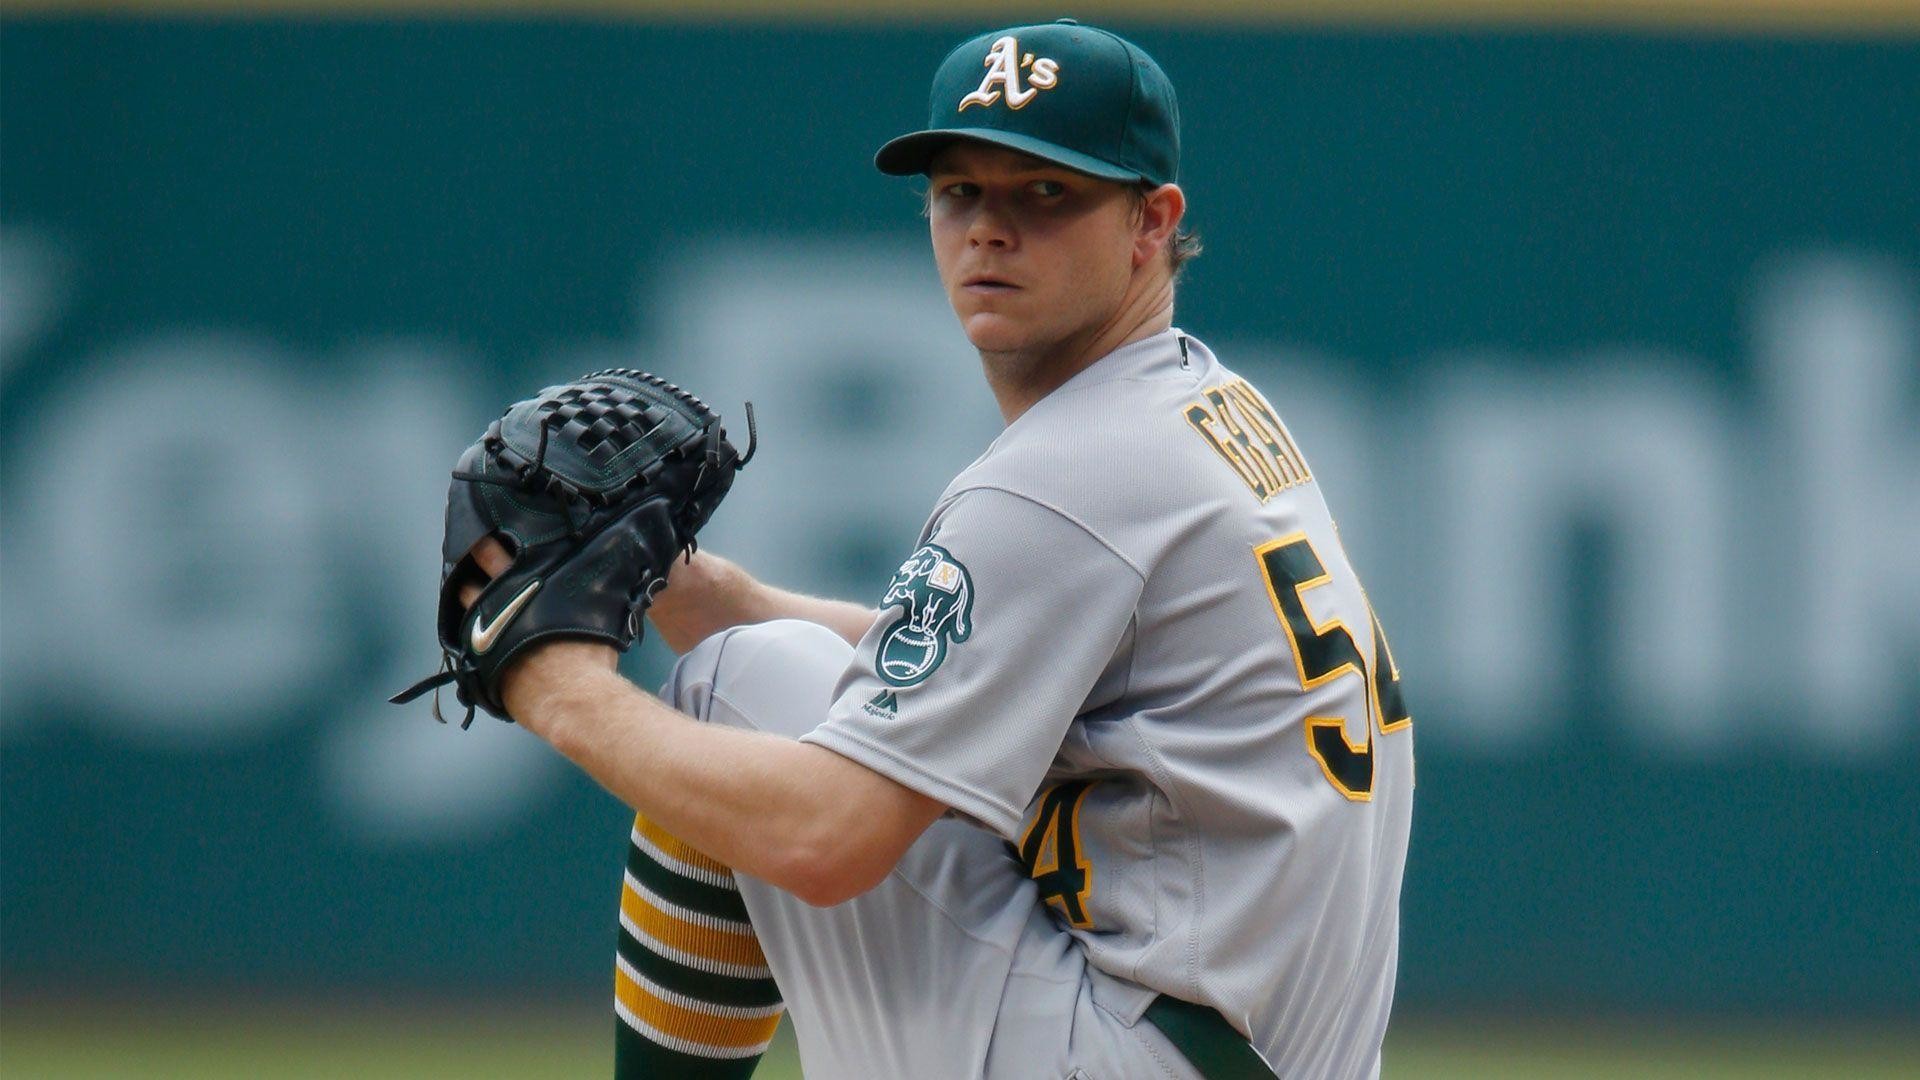 1920x1080 To prepare for WBC, Sonny Gray adjusts throwing schedule | NBCS .